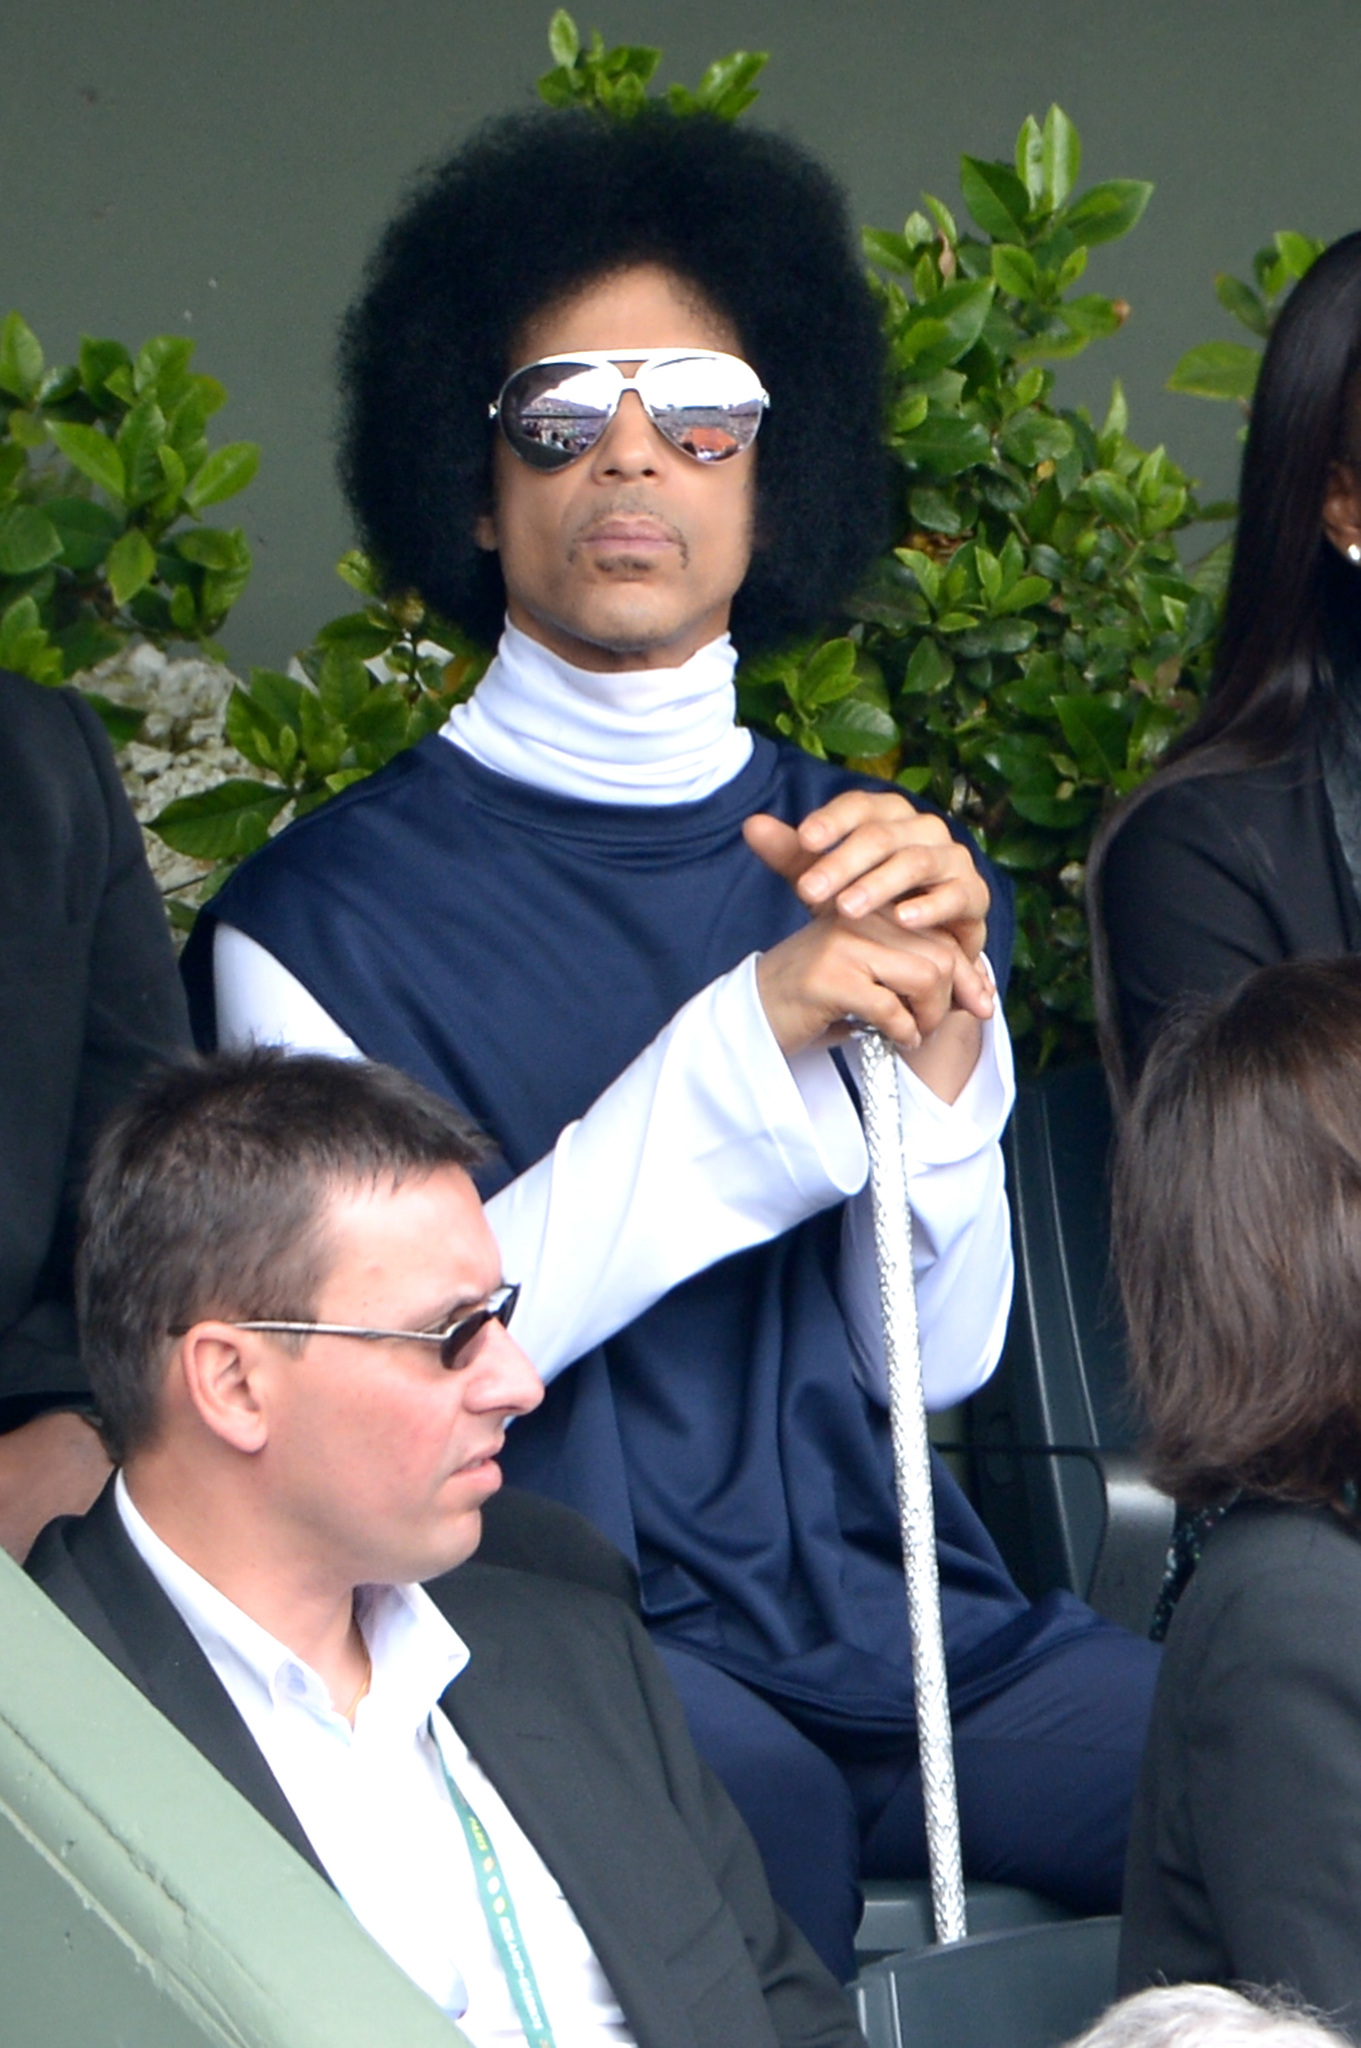 Singer Prince attend the Roland Garros French Tennis Open 2014 - Day 9 on June 2, 2014 in Paris, France.